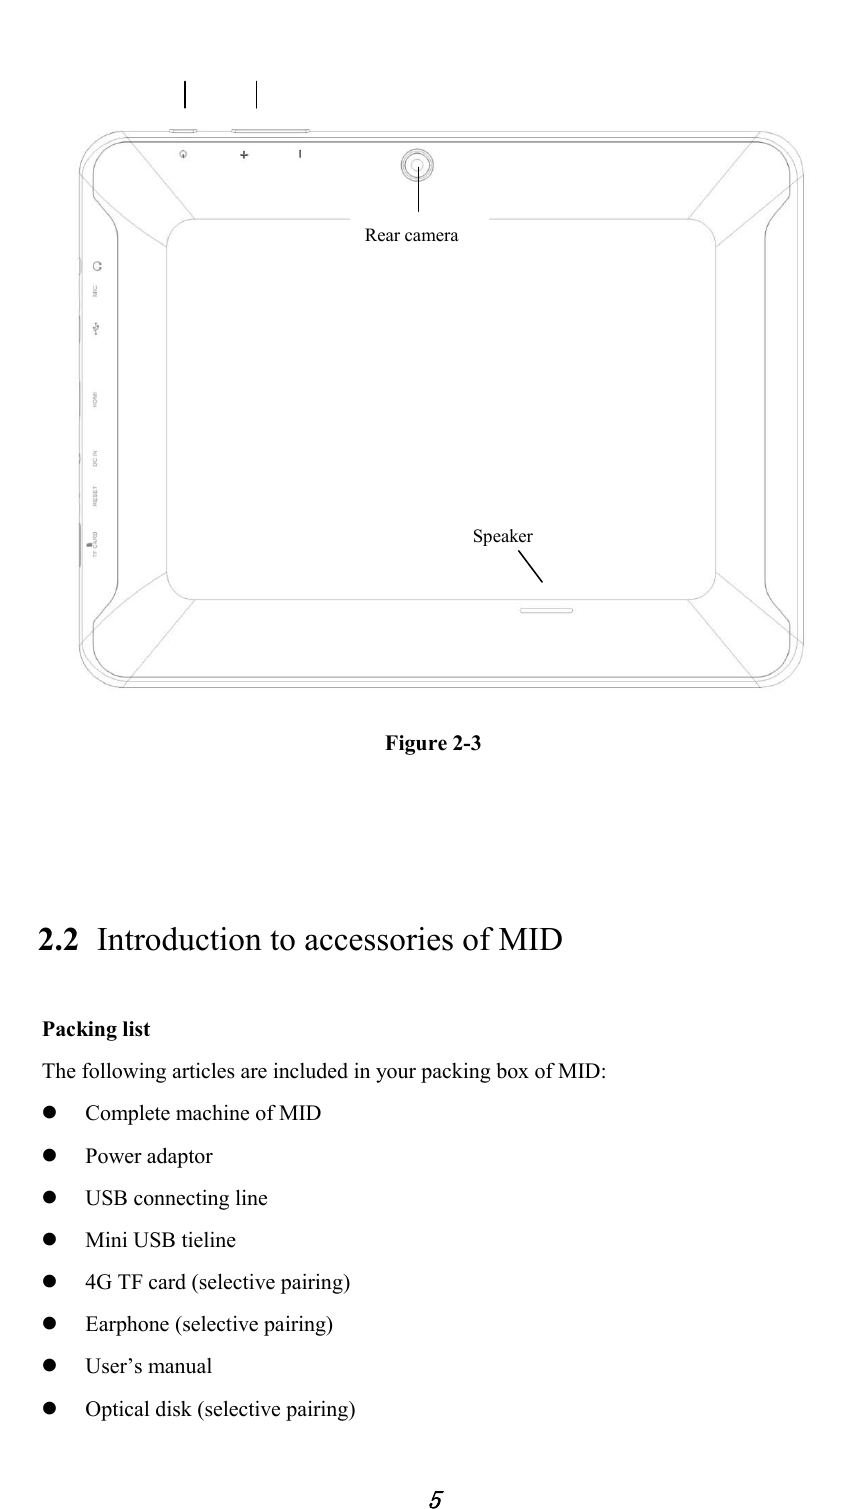            5     Figure 2-3   2.2 Introduction to accessories of MID Packing list The following articles are included in your packing box of MID:  Complete machine of MID  Power adaptor  USB connecting line  Mini USB tieline  4G TF card (selective pairing)  Earphone (selective pairing)  User’s manual  Optical disk (selective pairing) Speaker Rear camera 